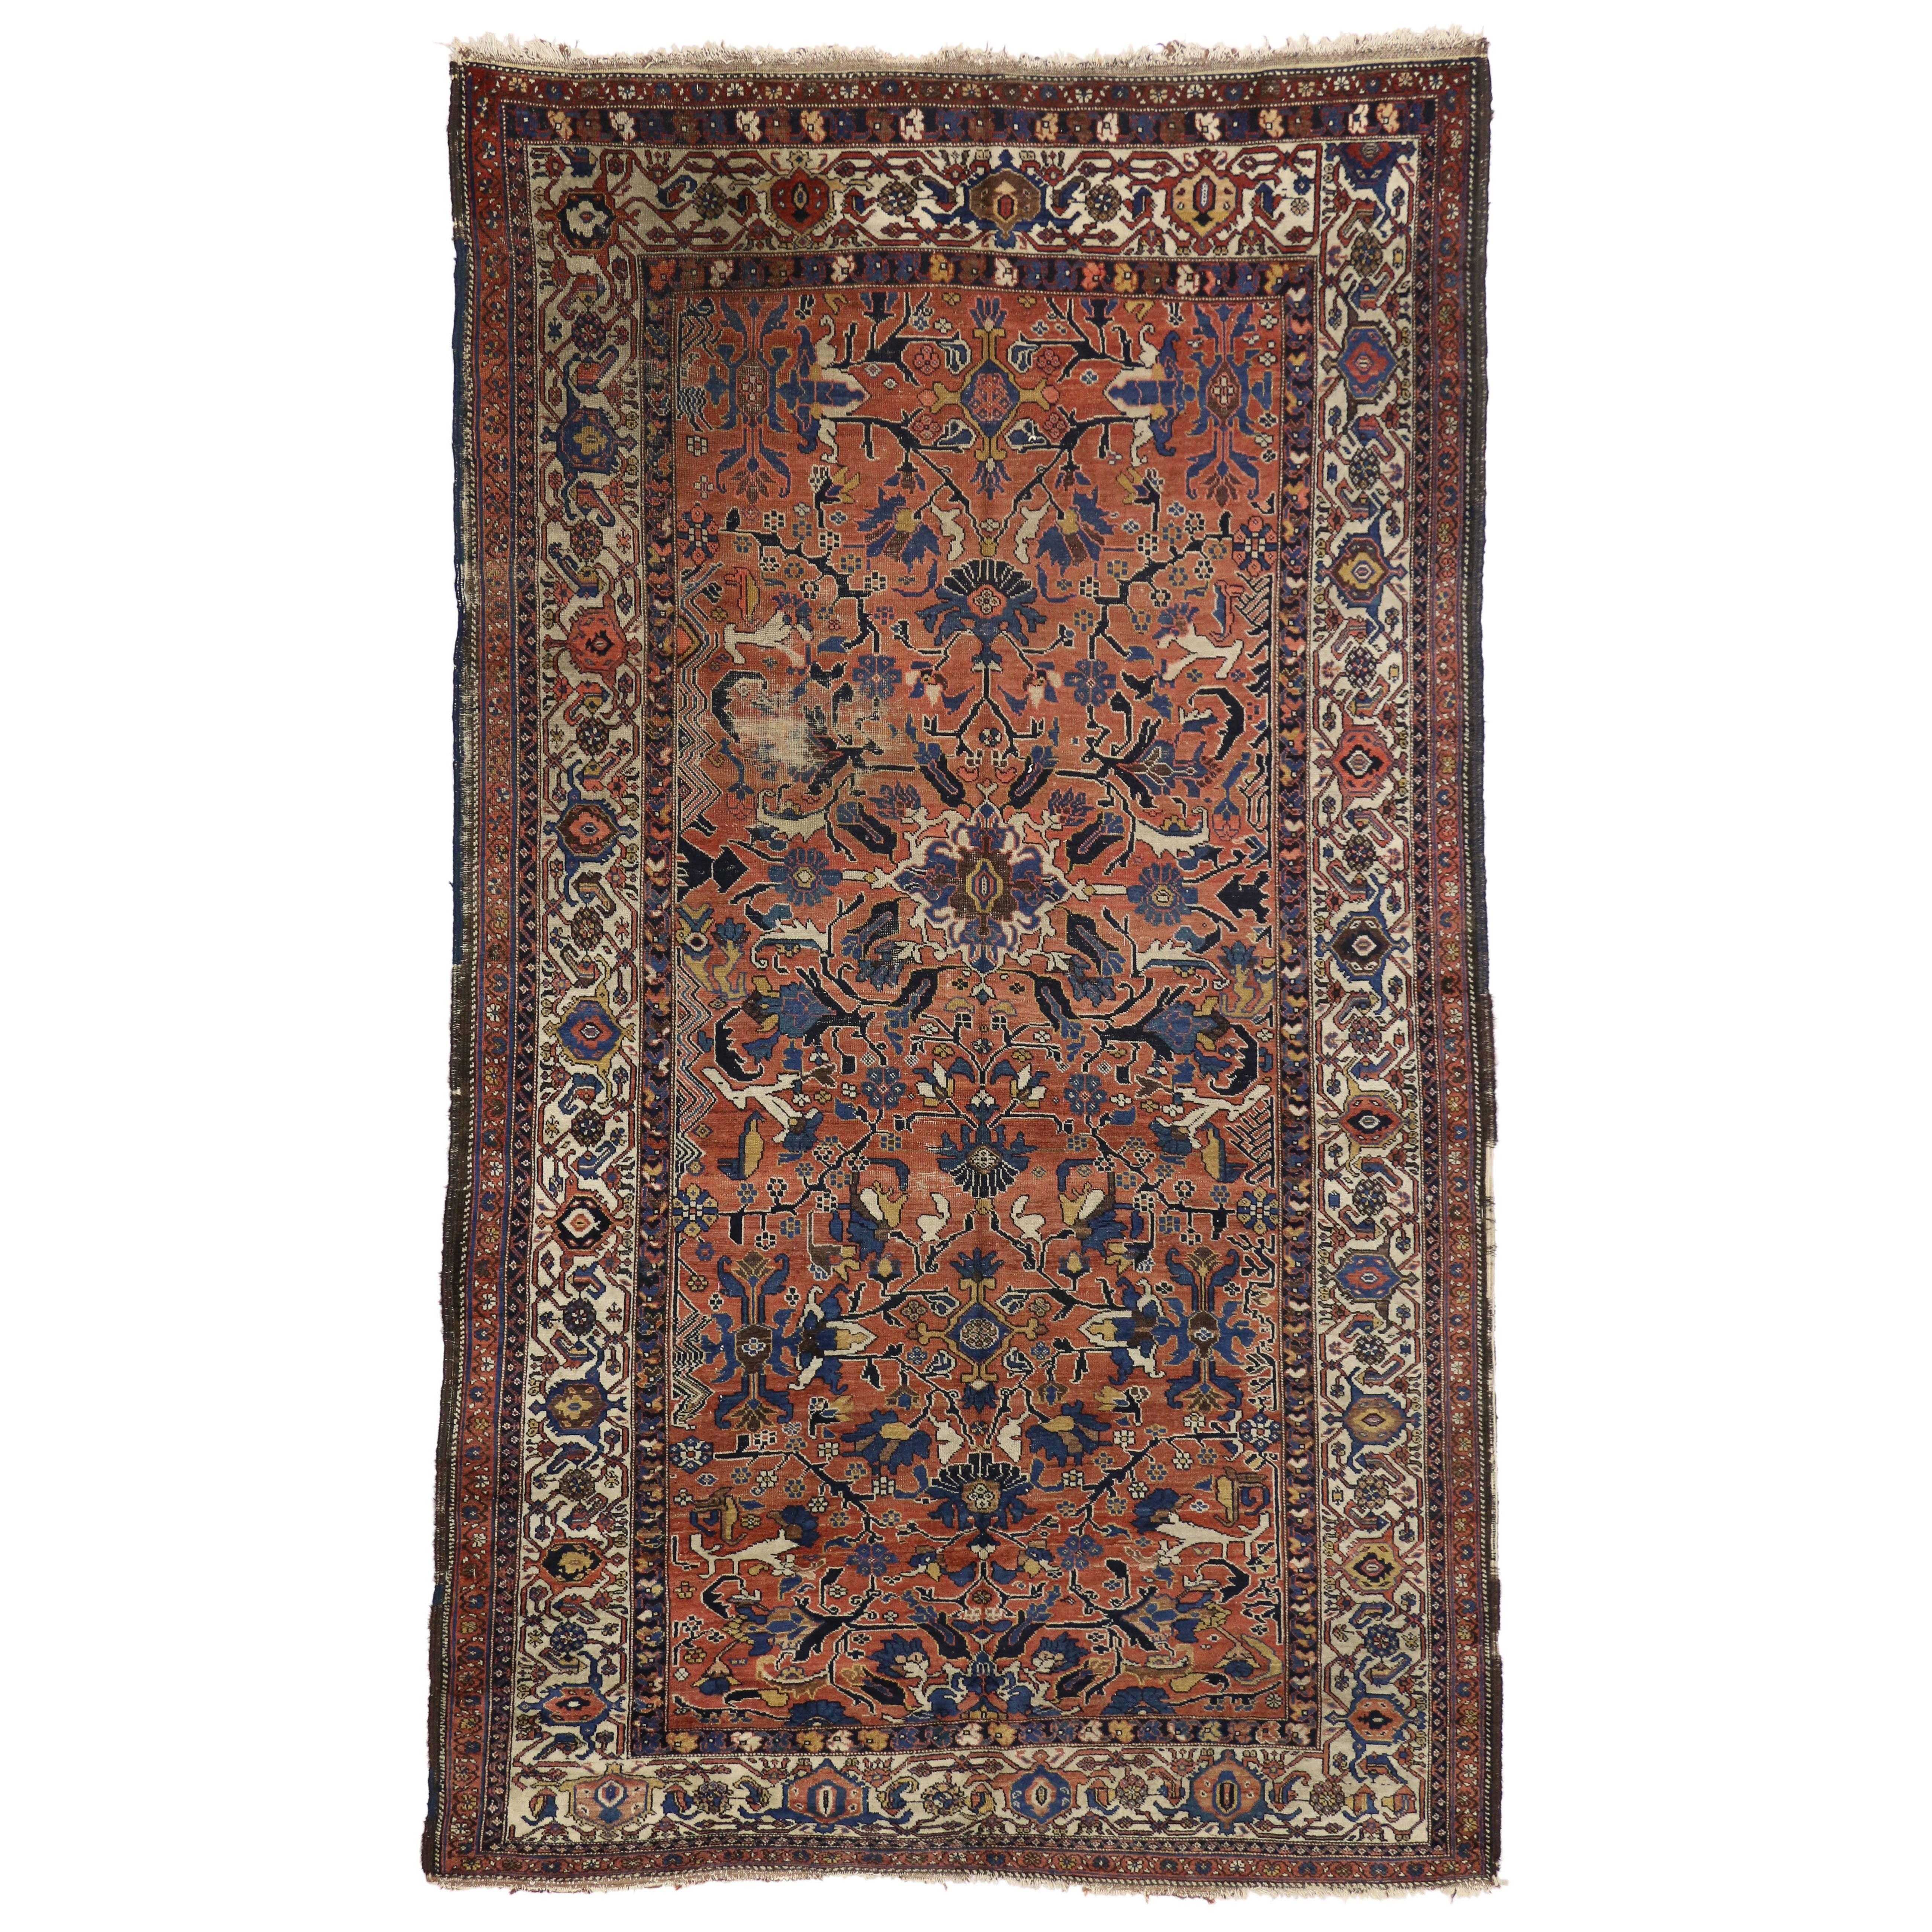 Distressed Antique Persian Bijar Rug with Modern Rustic Style